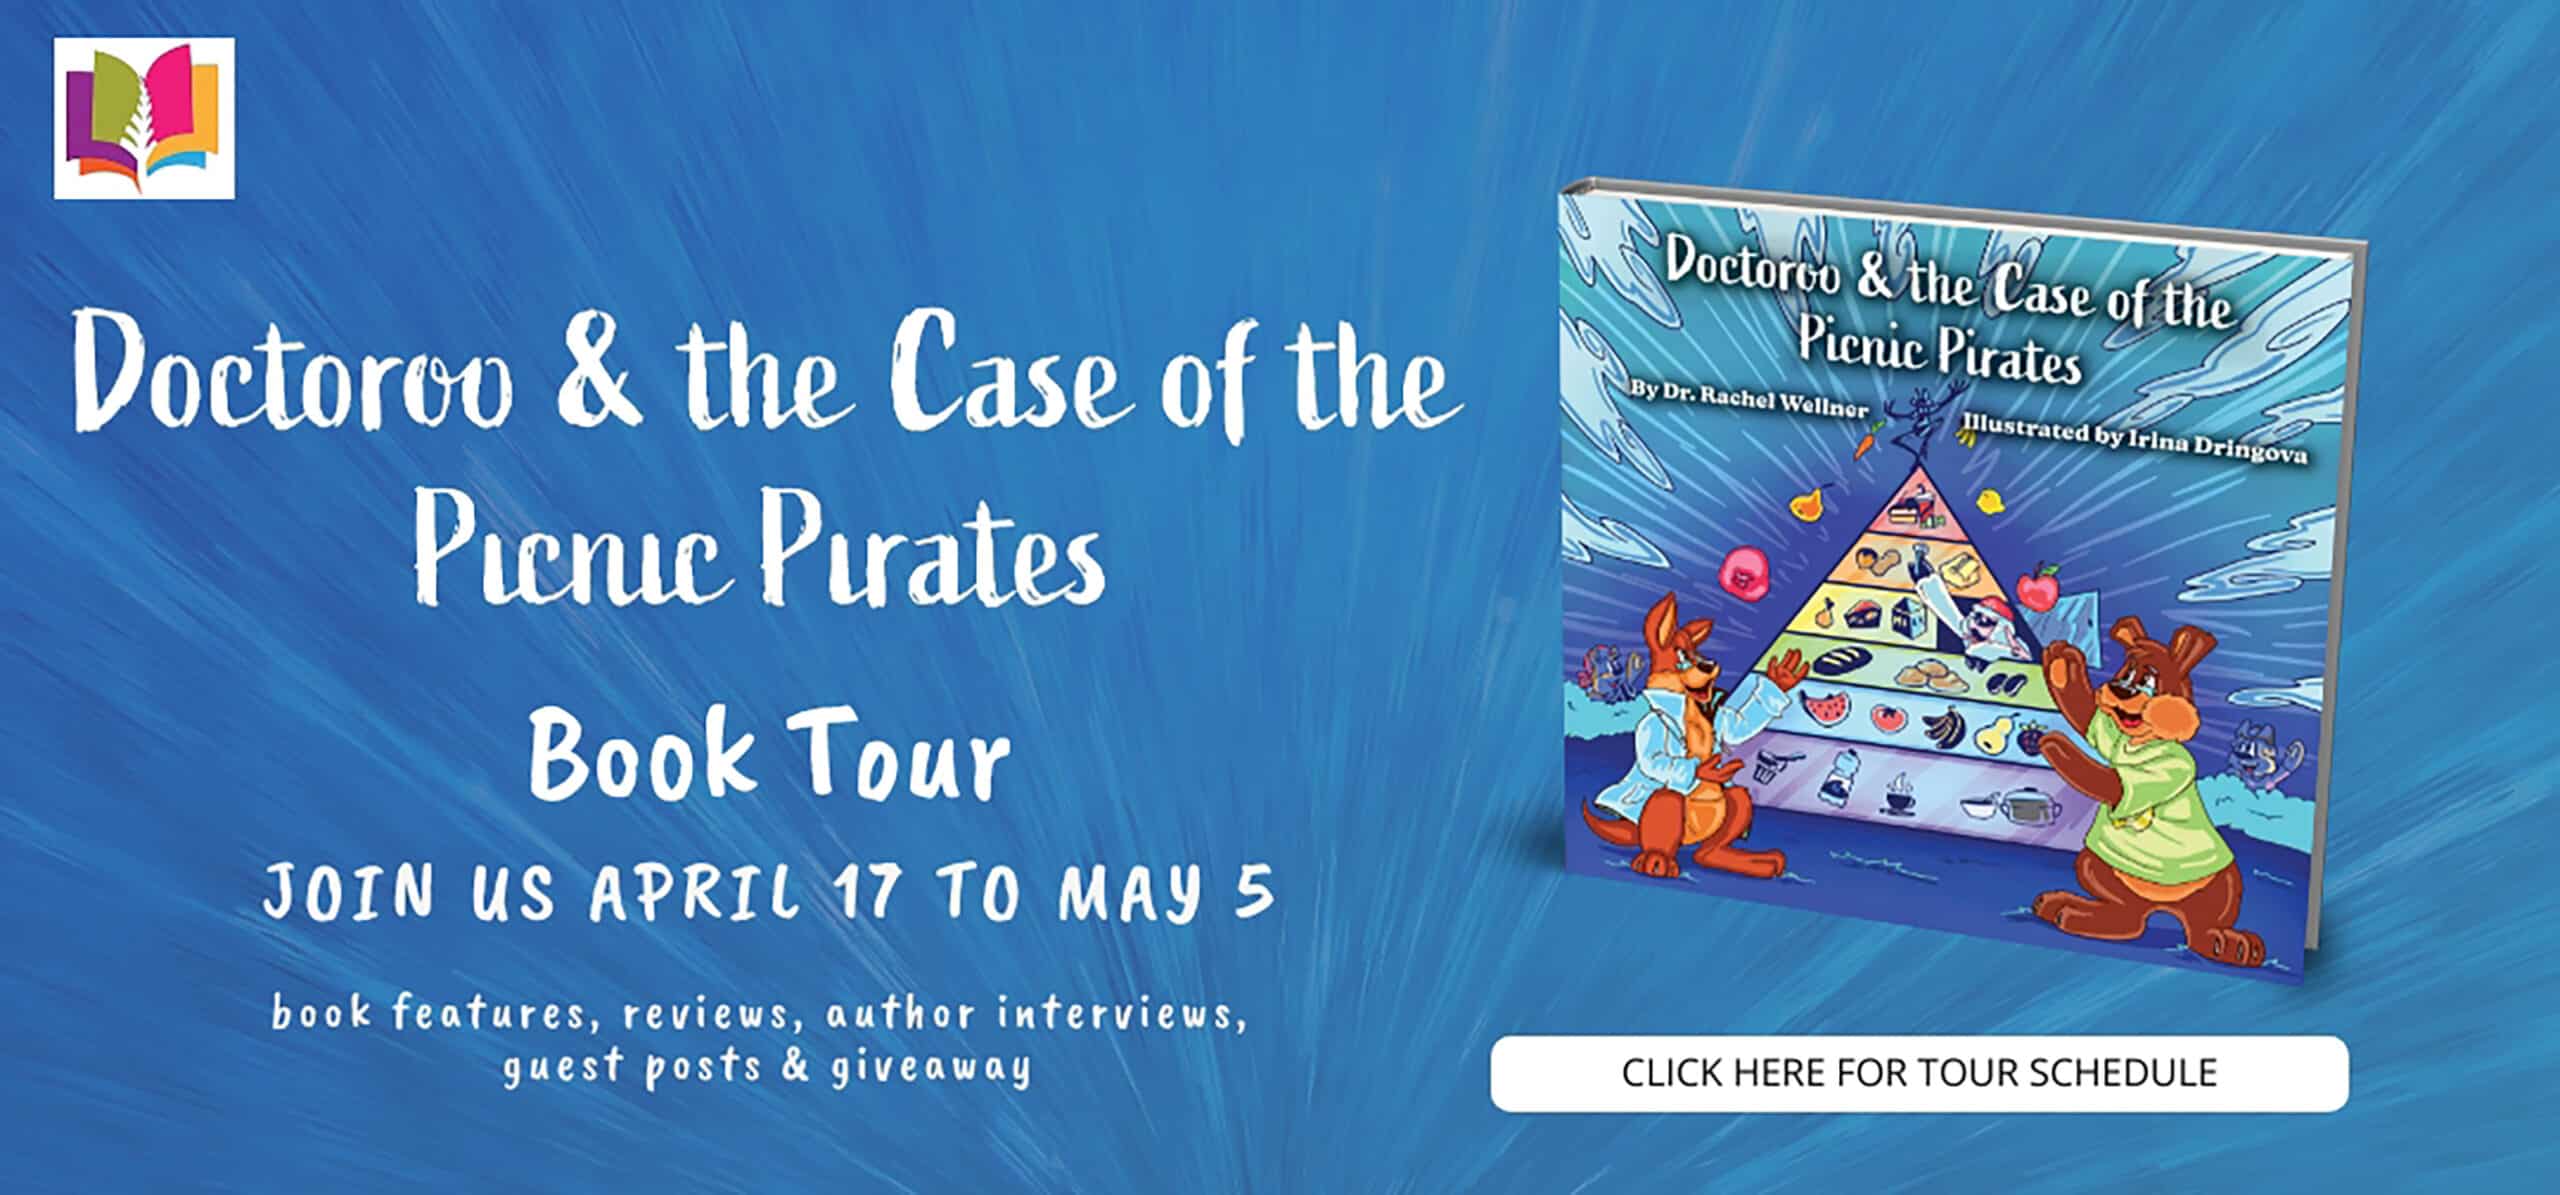 Doctoroo and the Case of the Picnic Pirates by Dr. Rachel Wellner | Children's Book Review ~ $50 Sephora Card ~Author Guest Post on Encouraging Picky Eaters